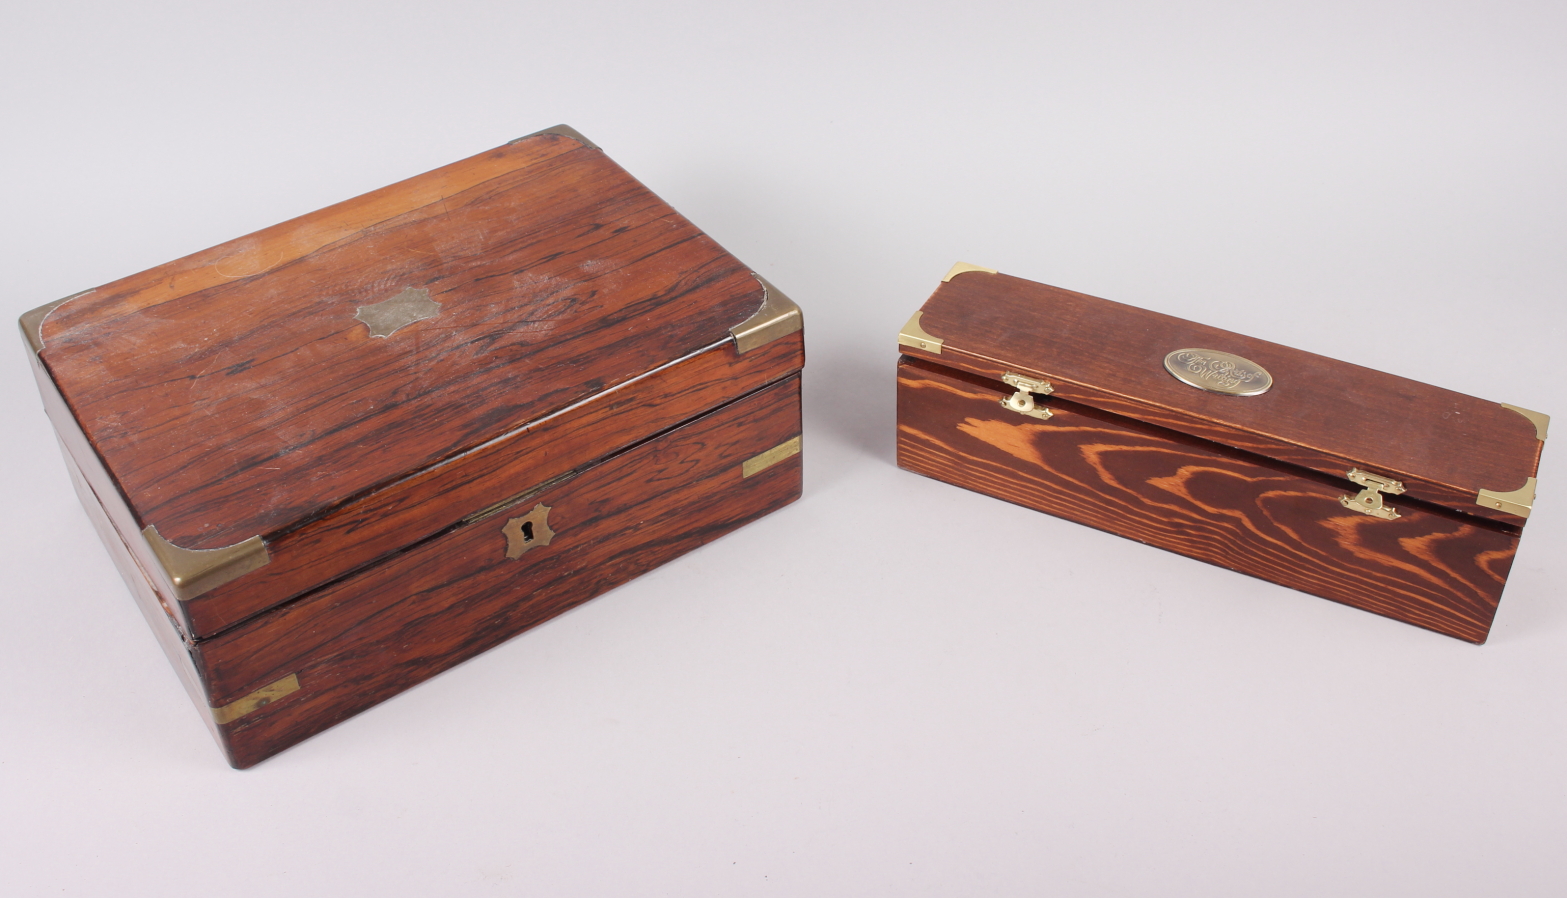 A 19th century rosewood writing box inset brass corners, 12" across, and a boxed calligraphy set